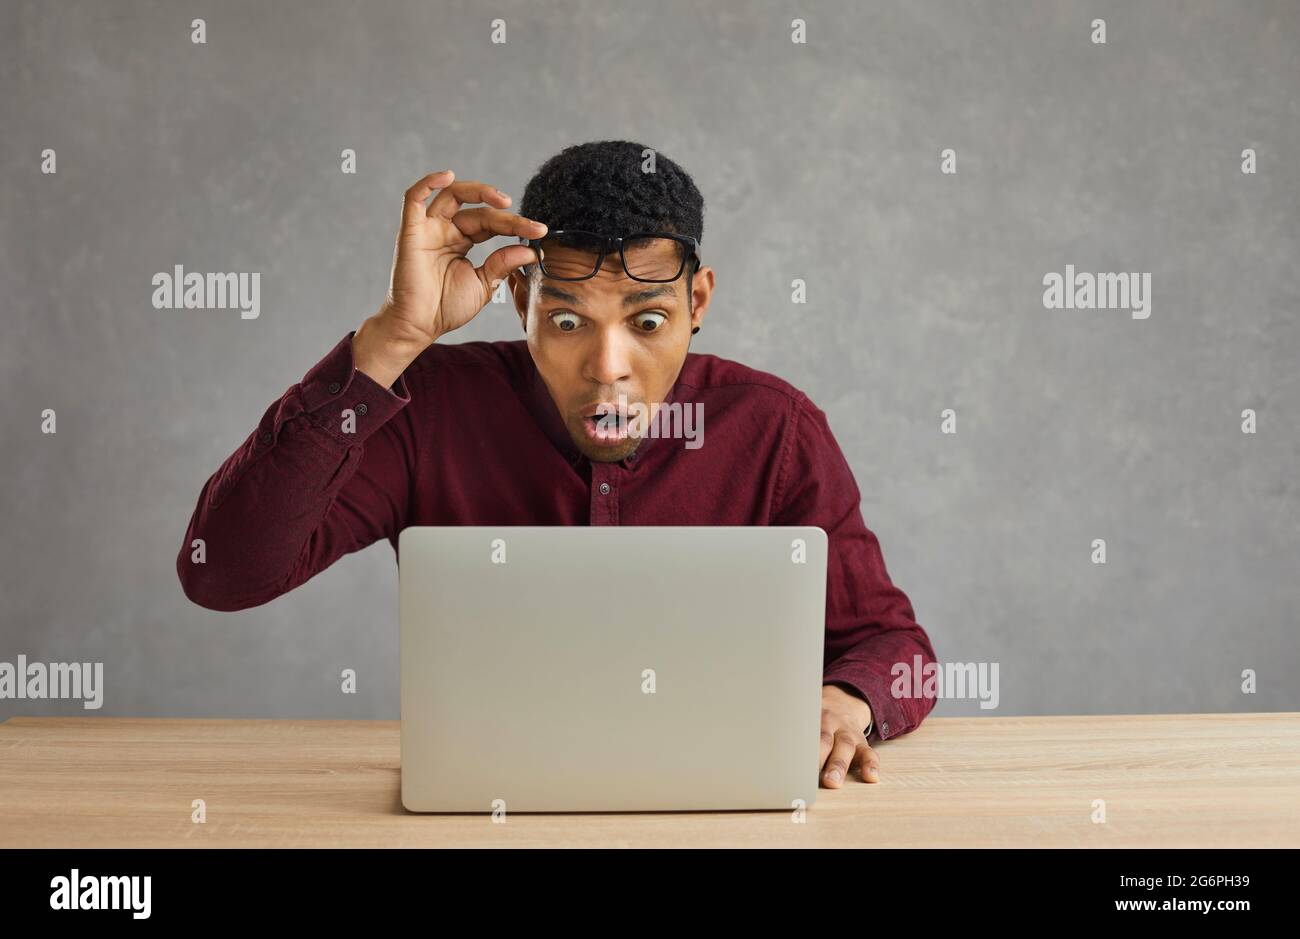 Shocked man take off eyeglasses looking with amazement face expression on laptop Stock Photo